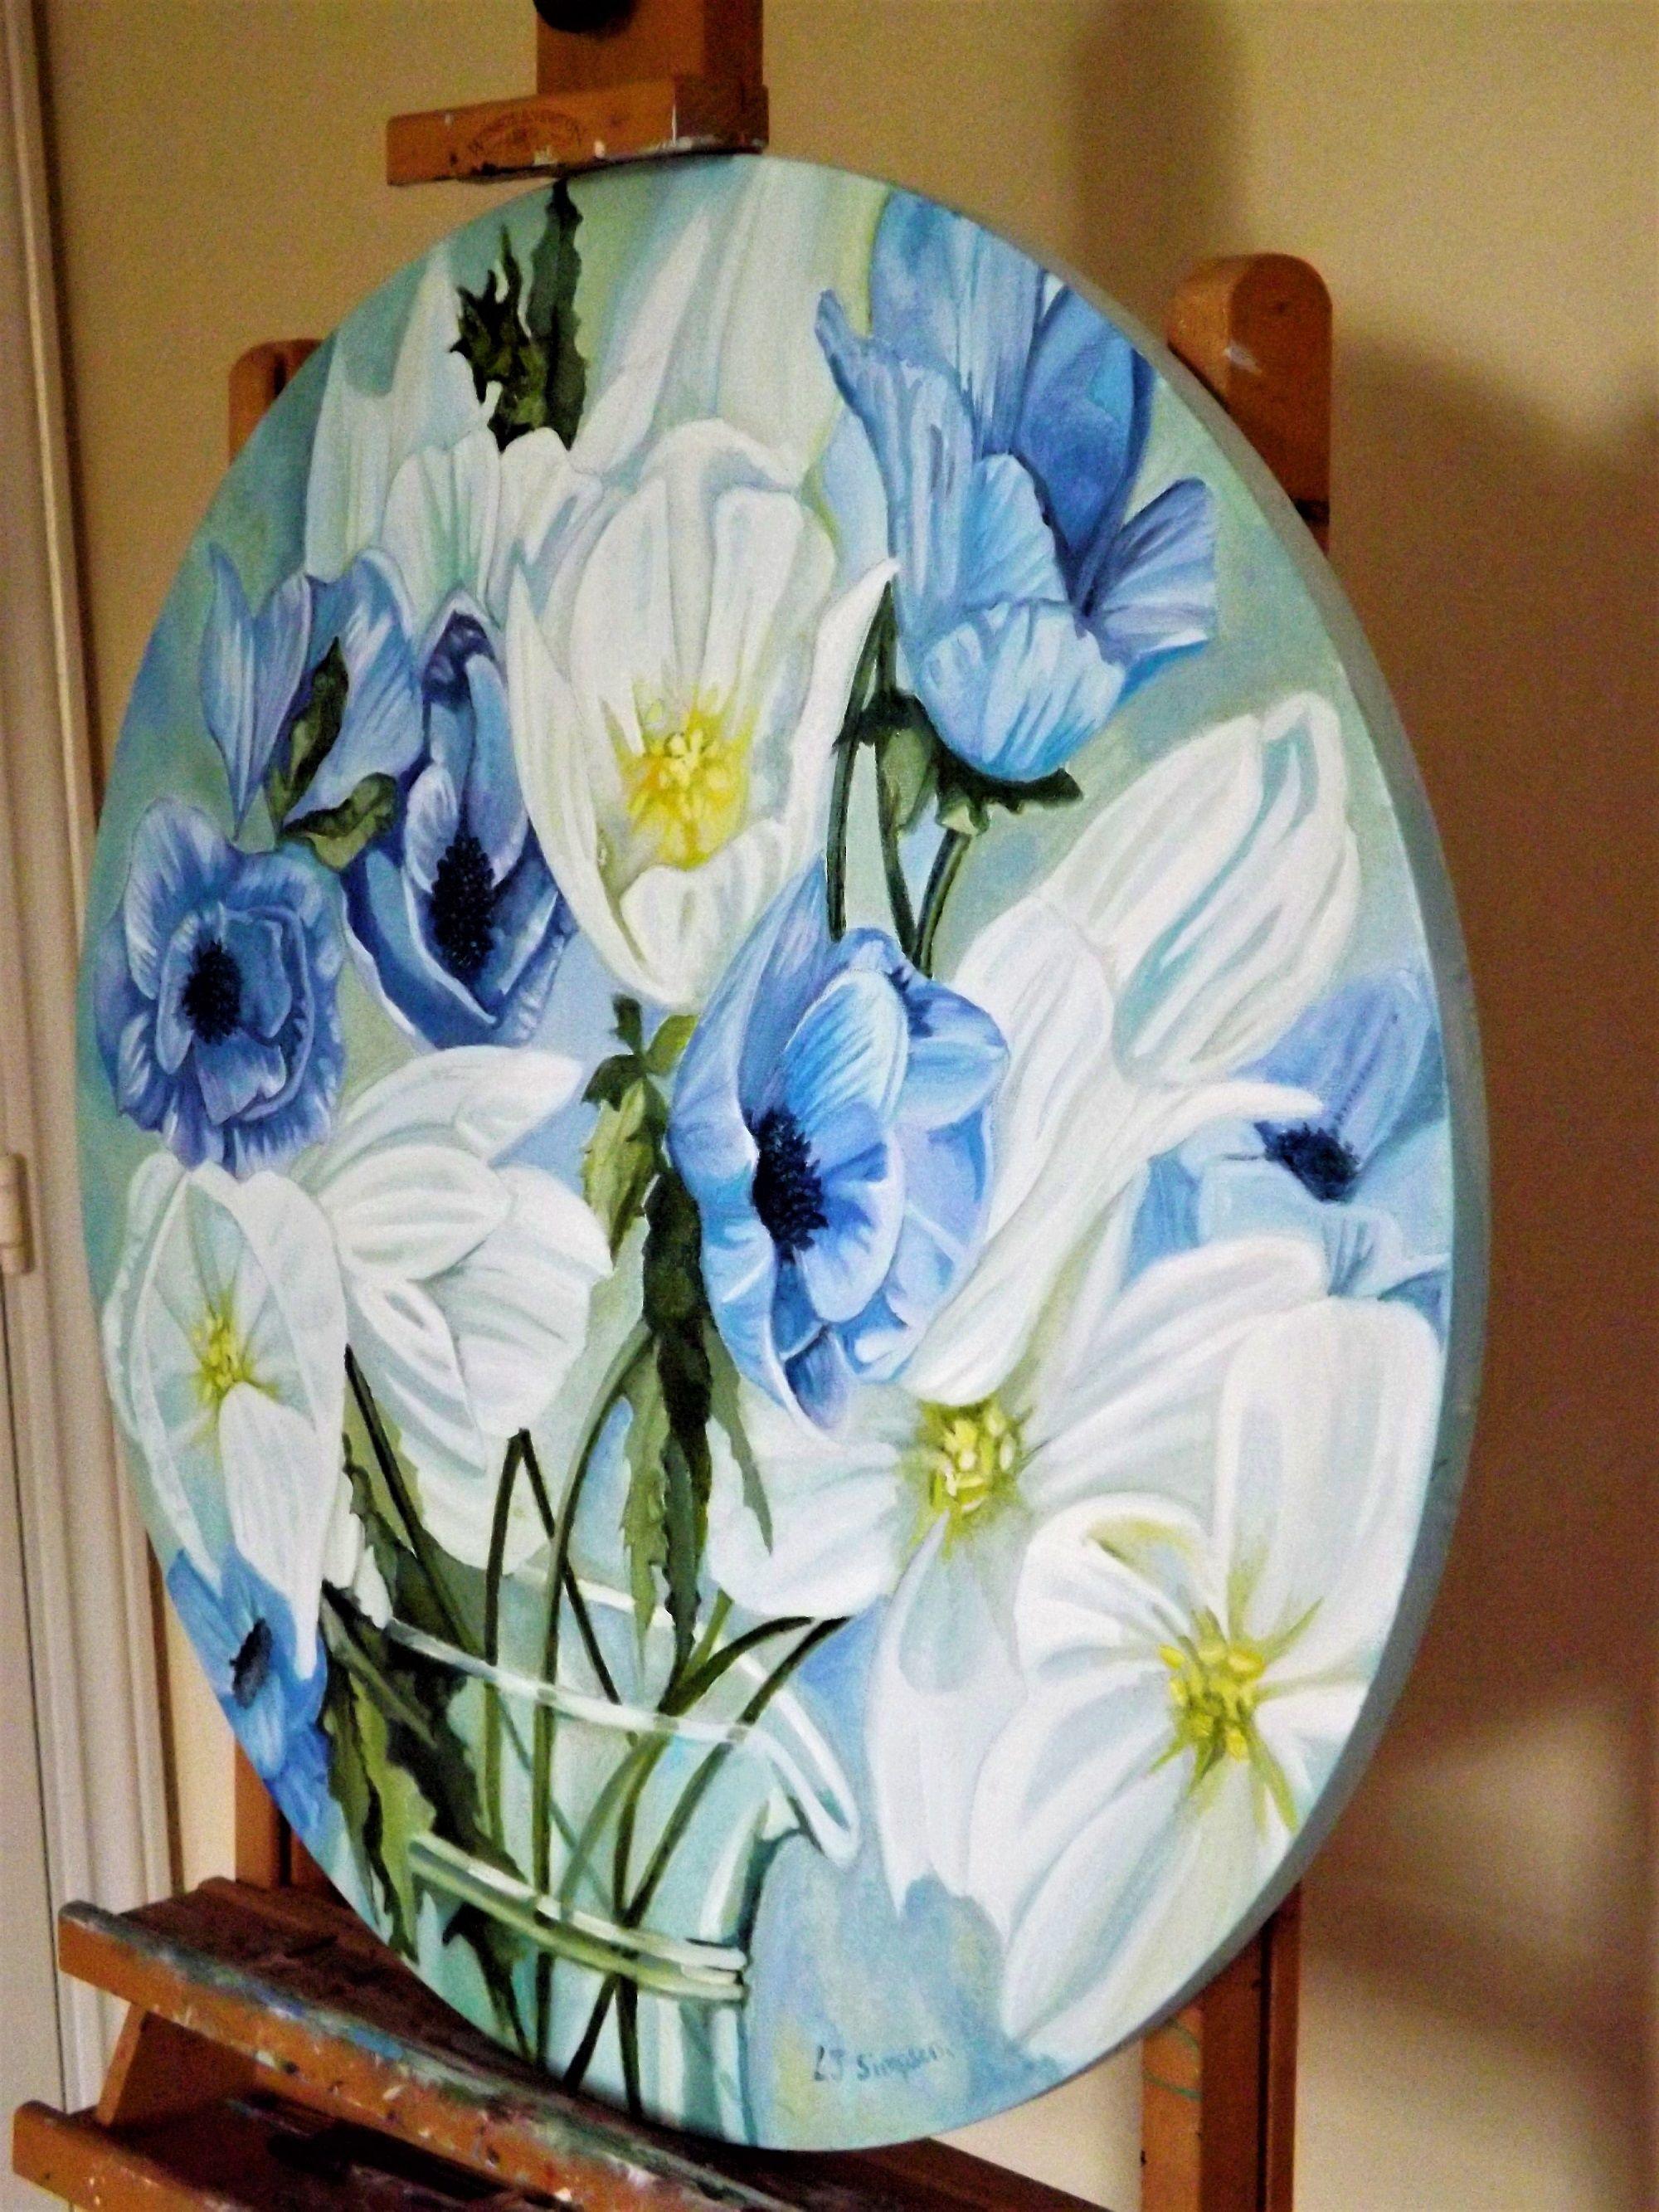 This is a first from my new collection that I am developing. Using blue anemones and white tulips it still has elements from my signature style, for example the close up crop of the flowers that fill the entire canvas with the emphasis on light and